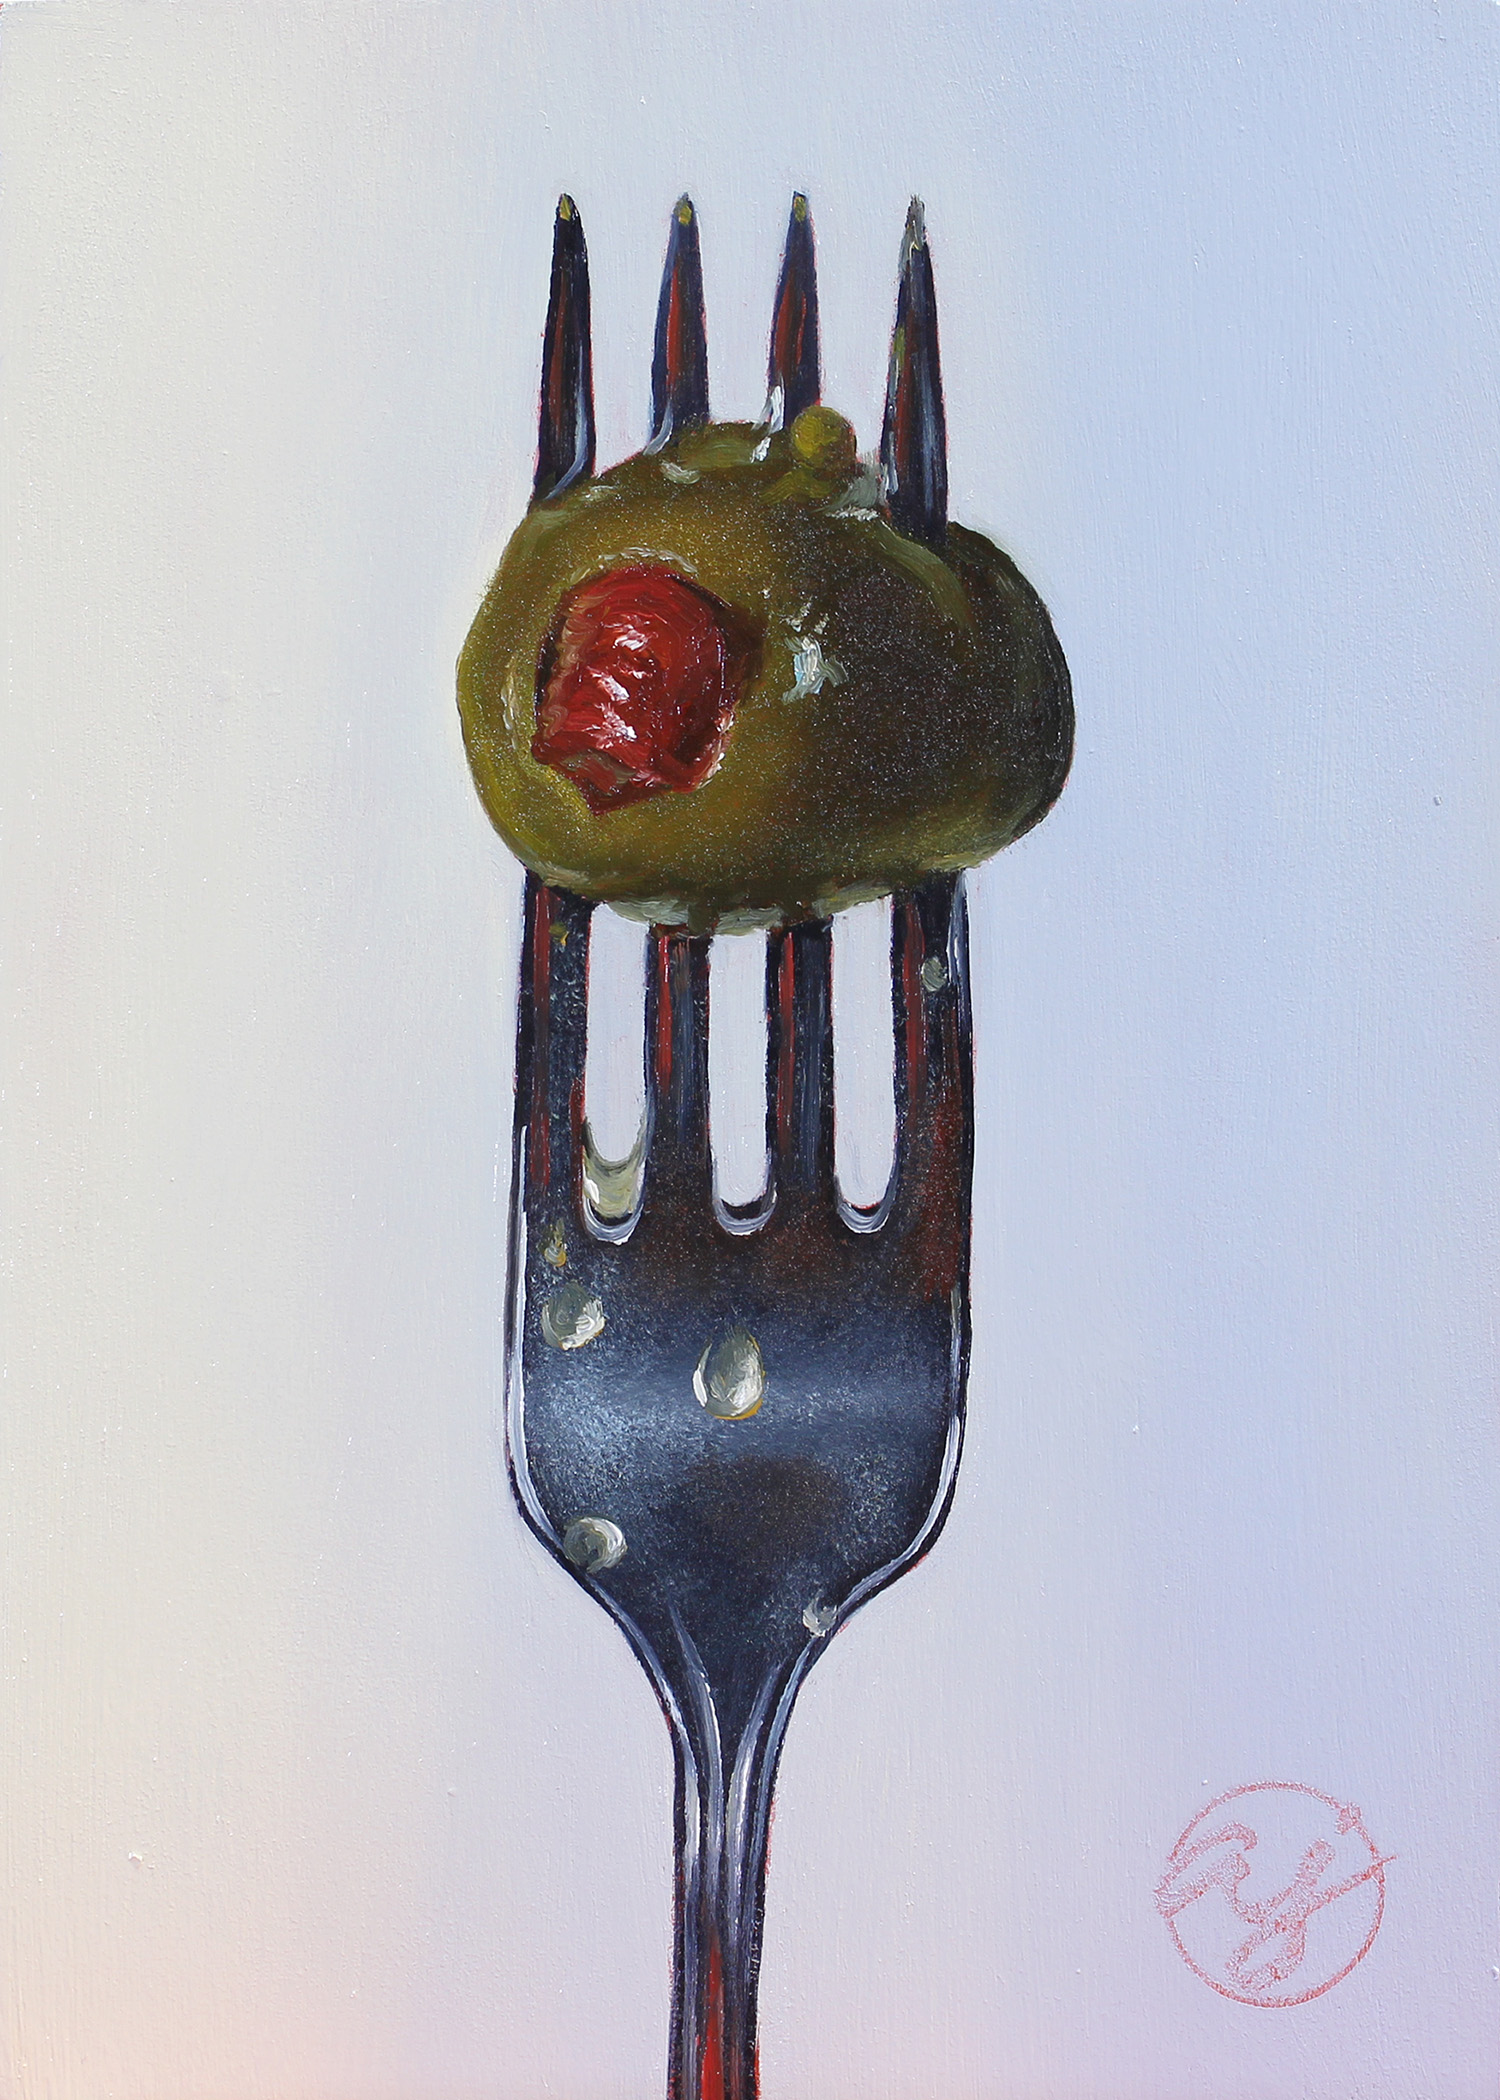 "Put a Fork in it: Olive II" 5x7 Original Oil Painting by Abra Johnson